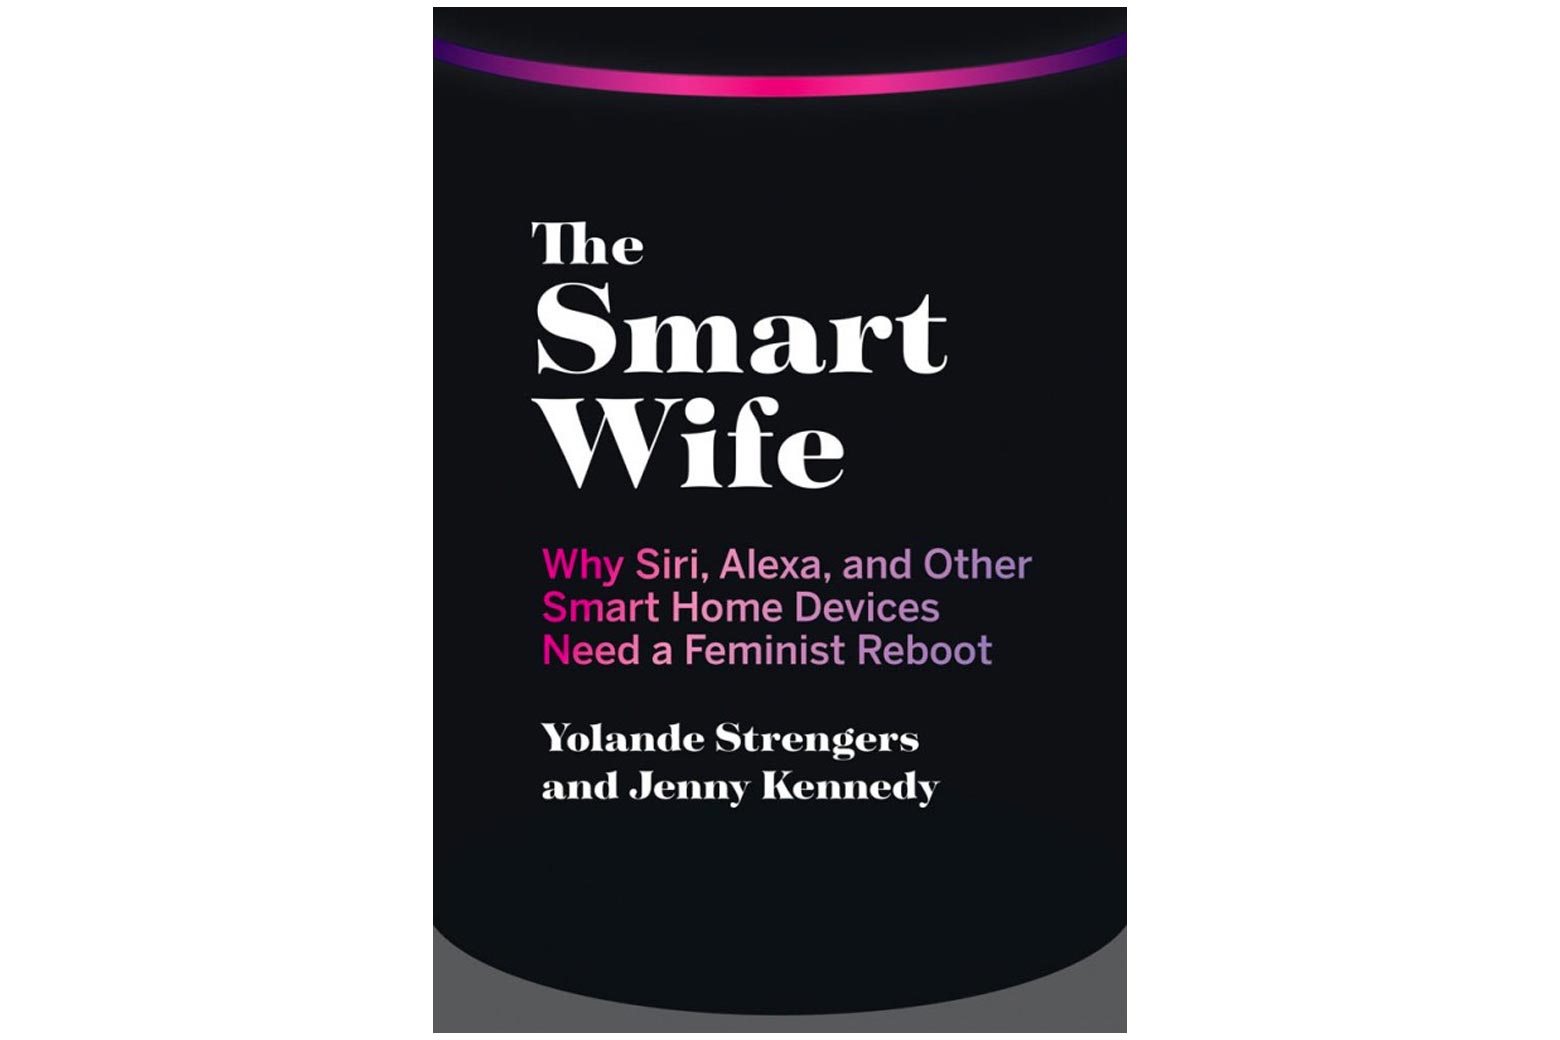 The book cover for The Smart Wife.